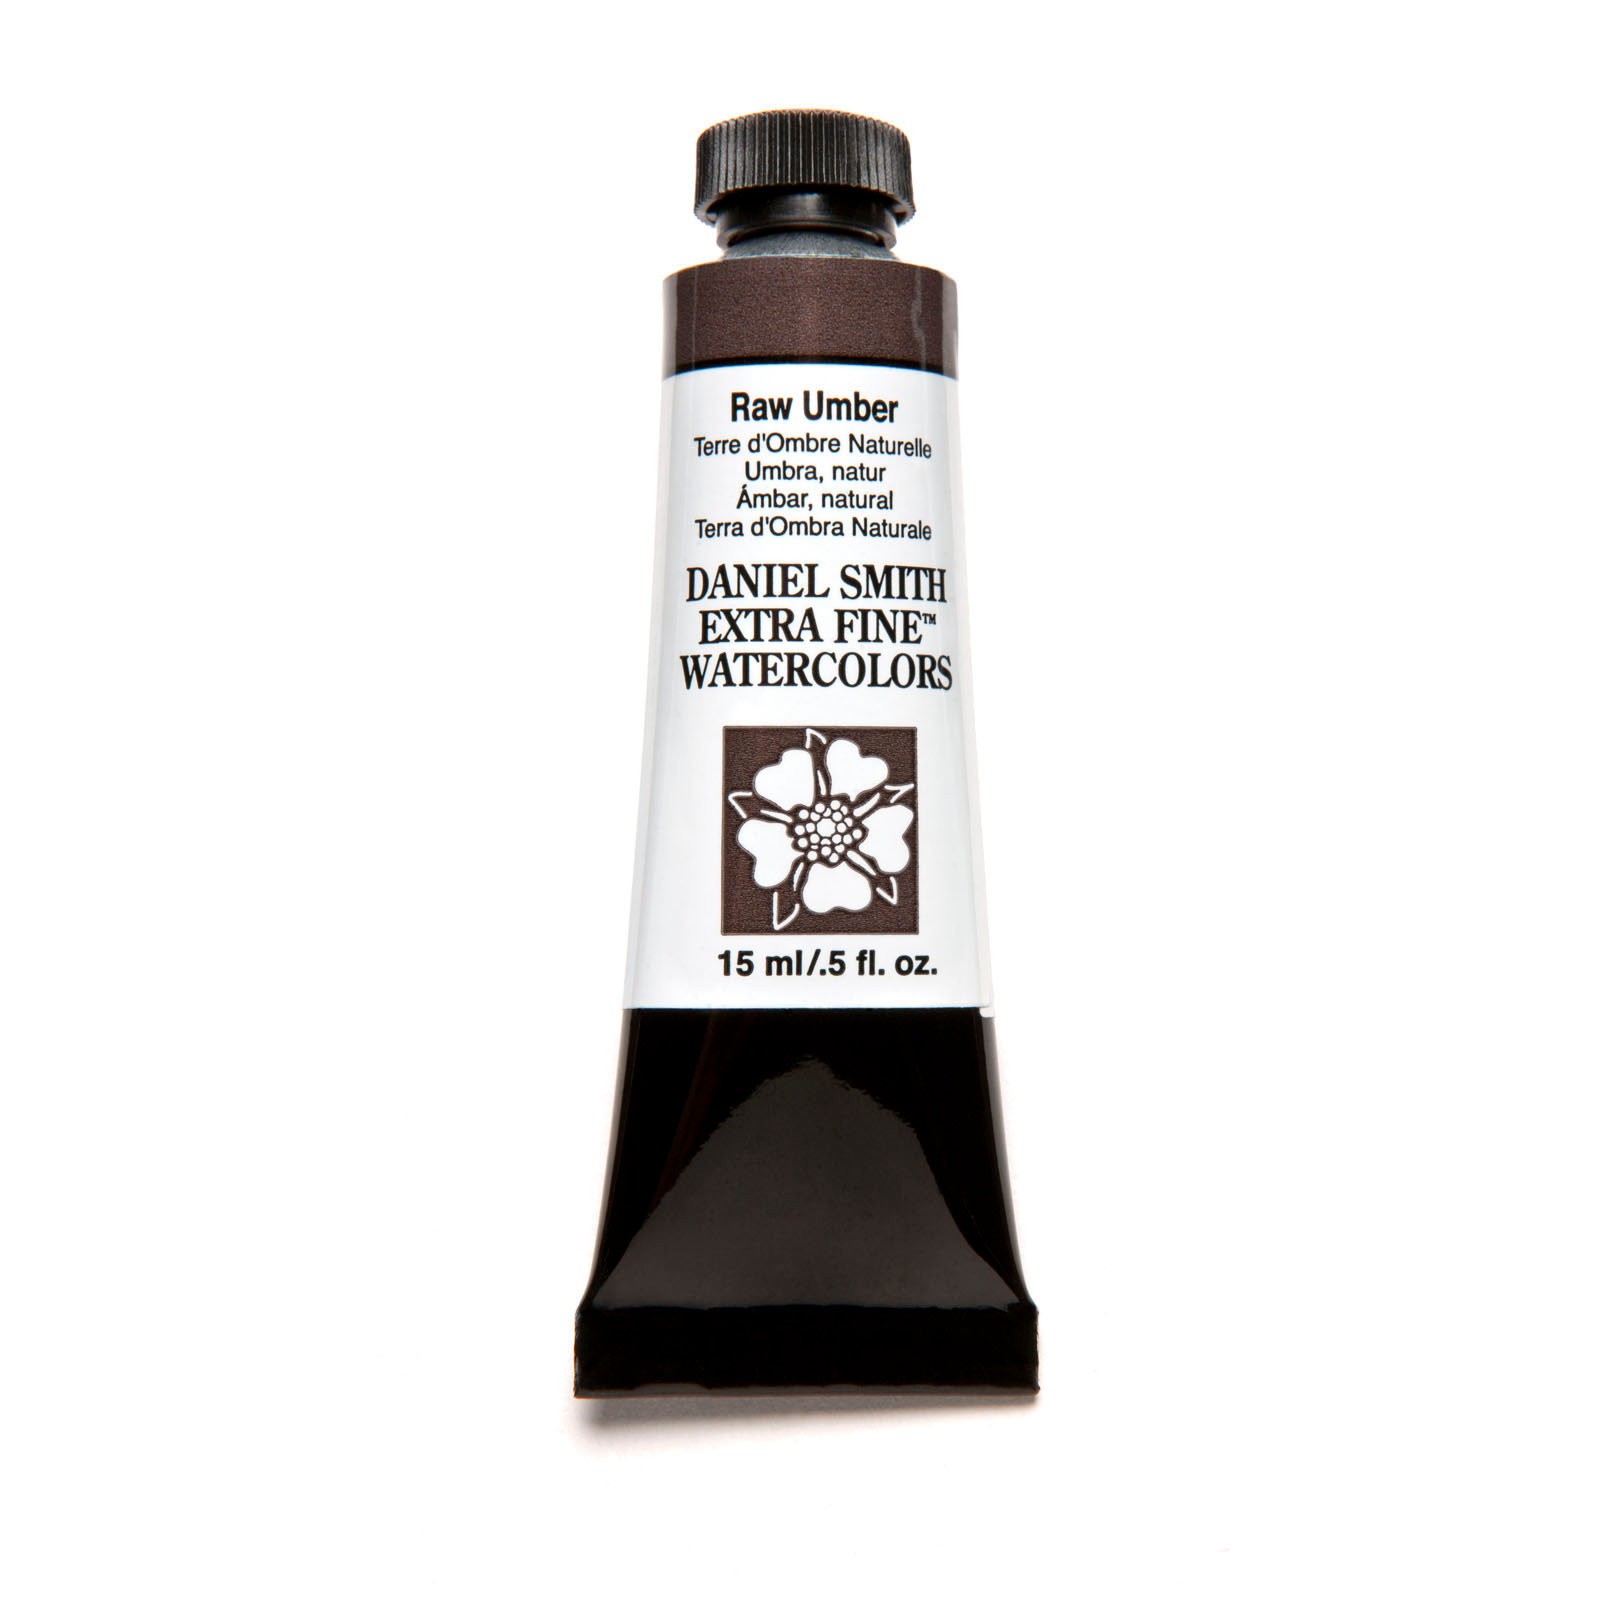 Daniel Smith Extra-Fine Watercolors, 15ml Tubes, Raw Umber